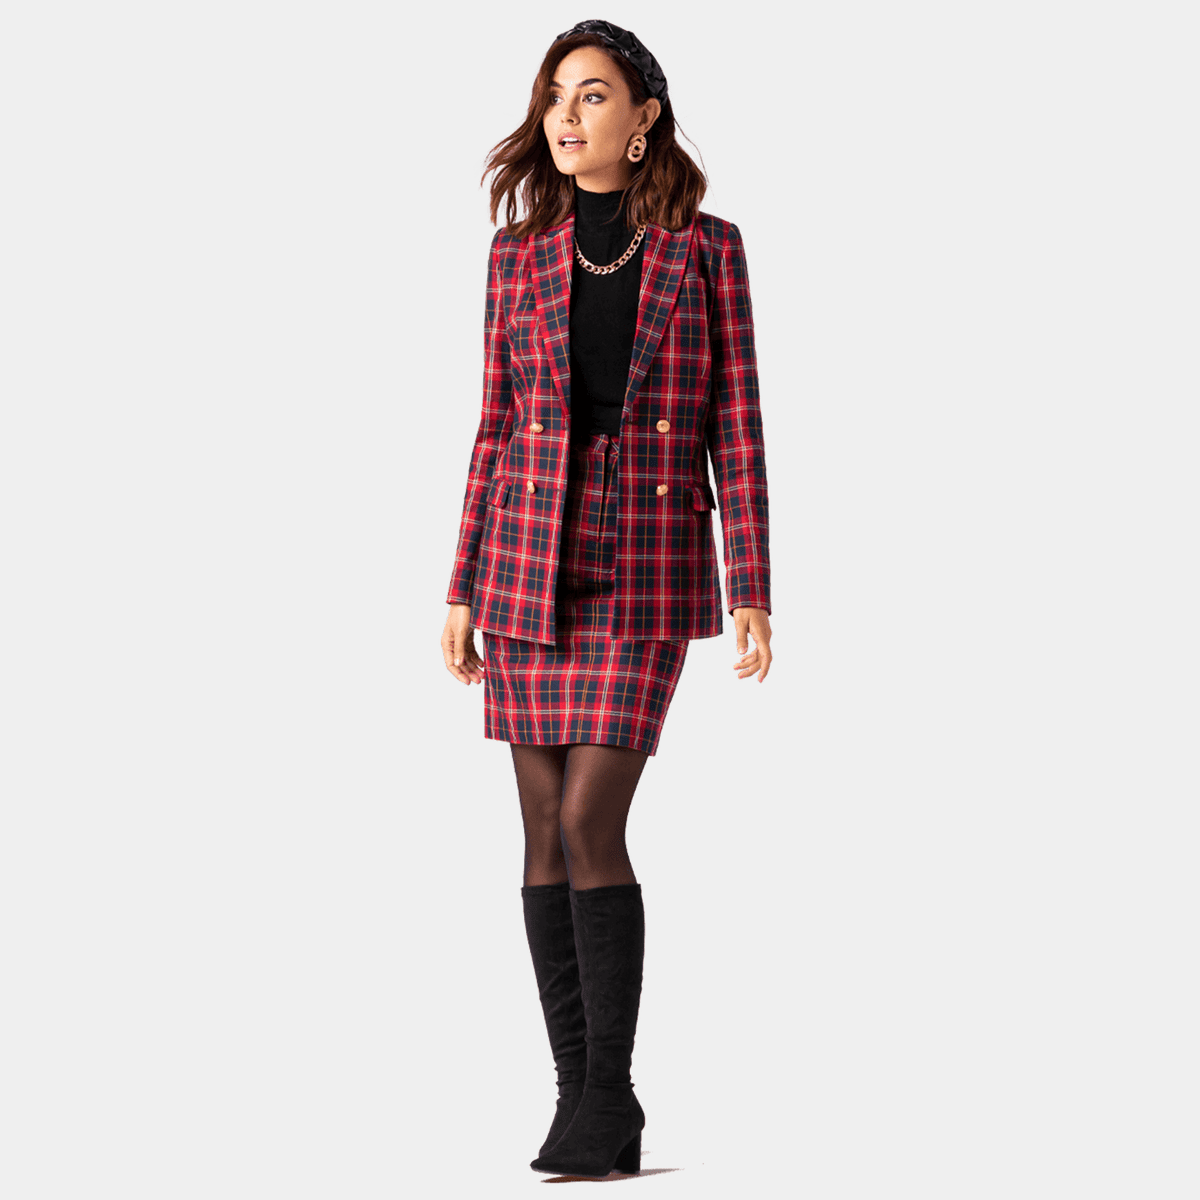 Red double breasted Plaid short Skirt Suit $277 | Sumissura